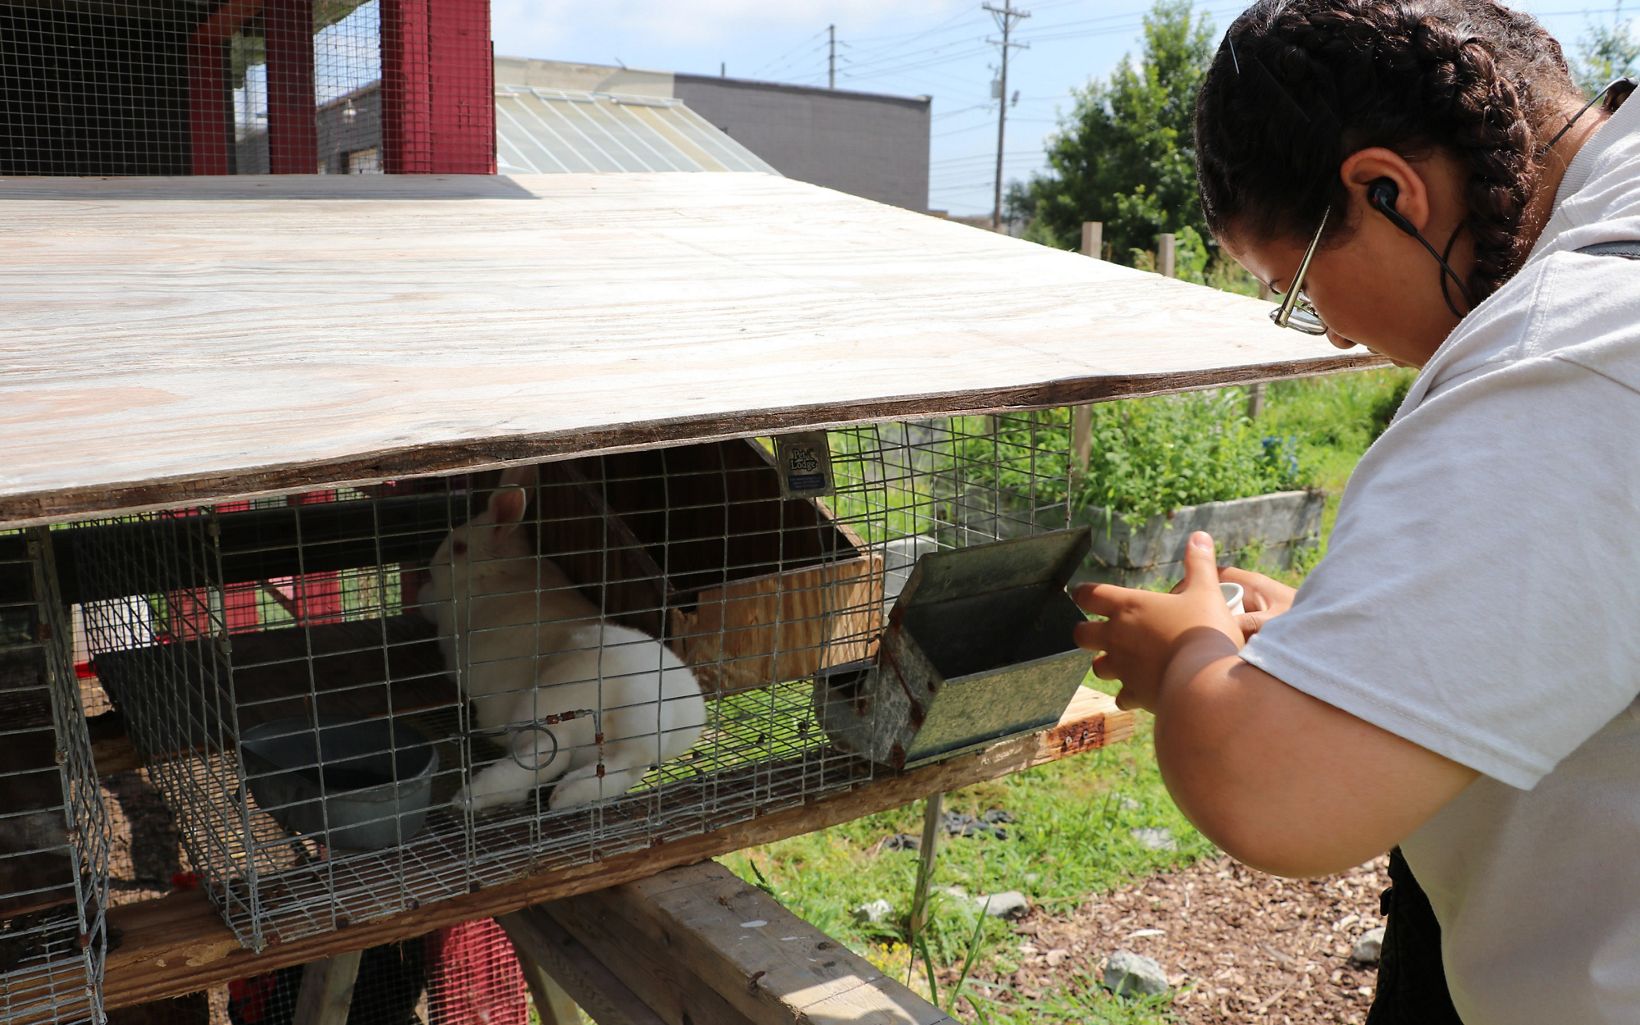 A young woman feeds a rabbit.